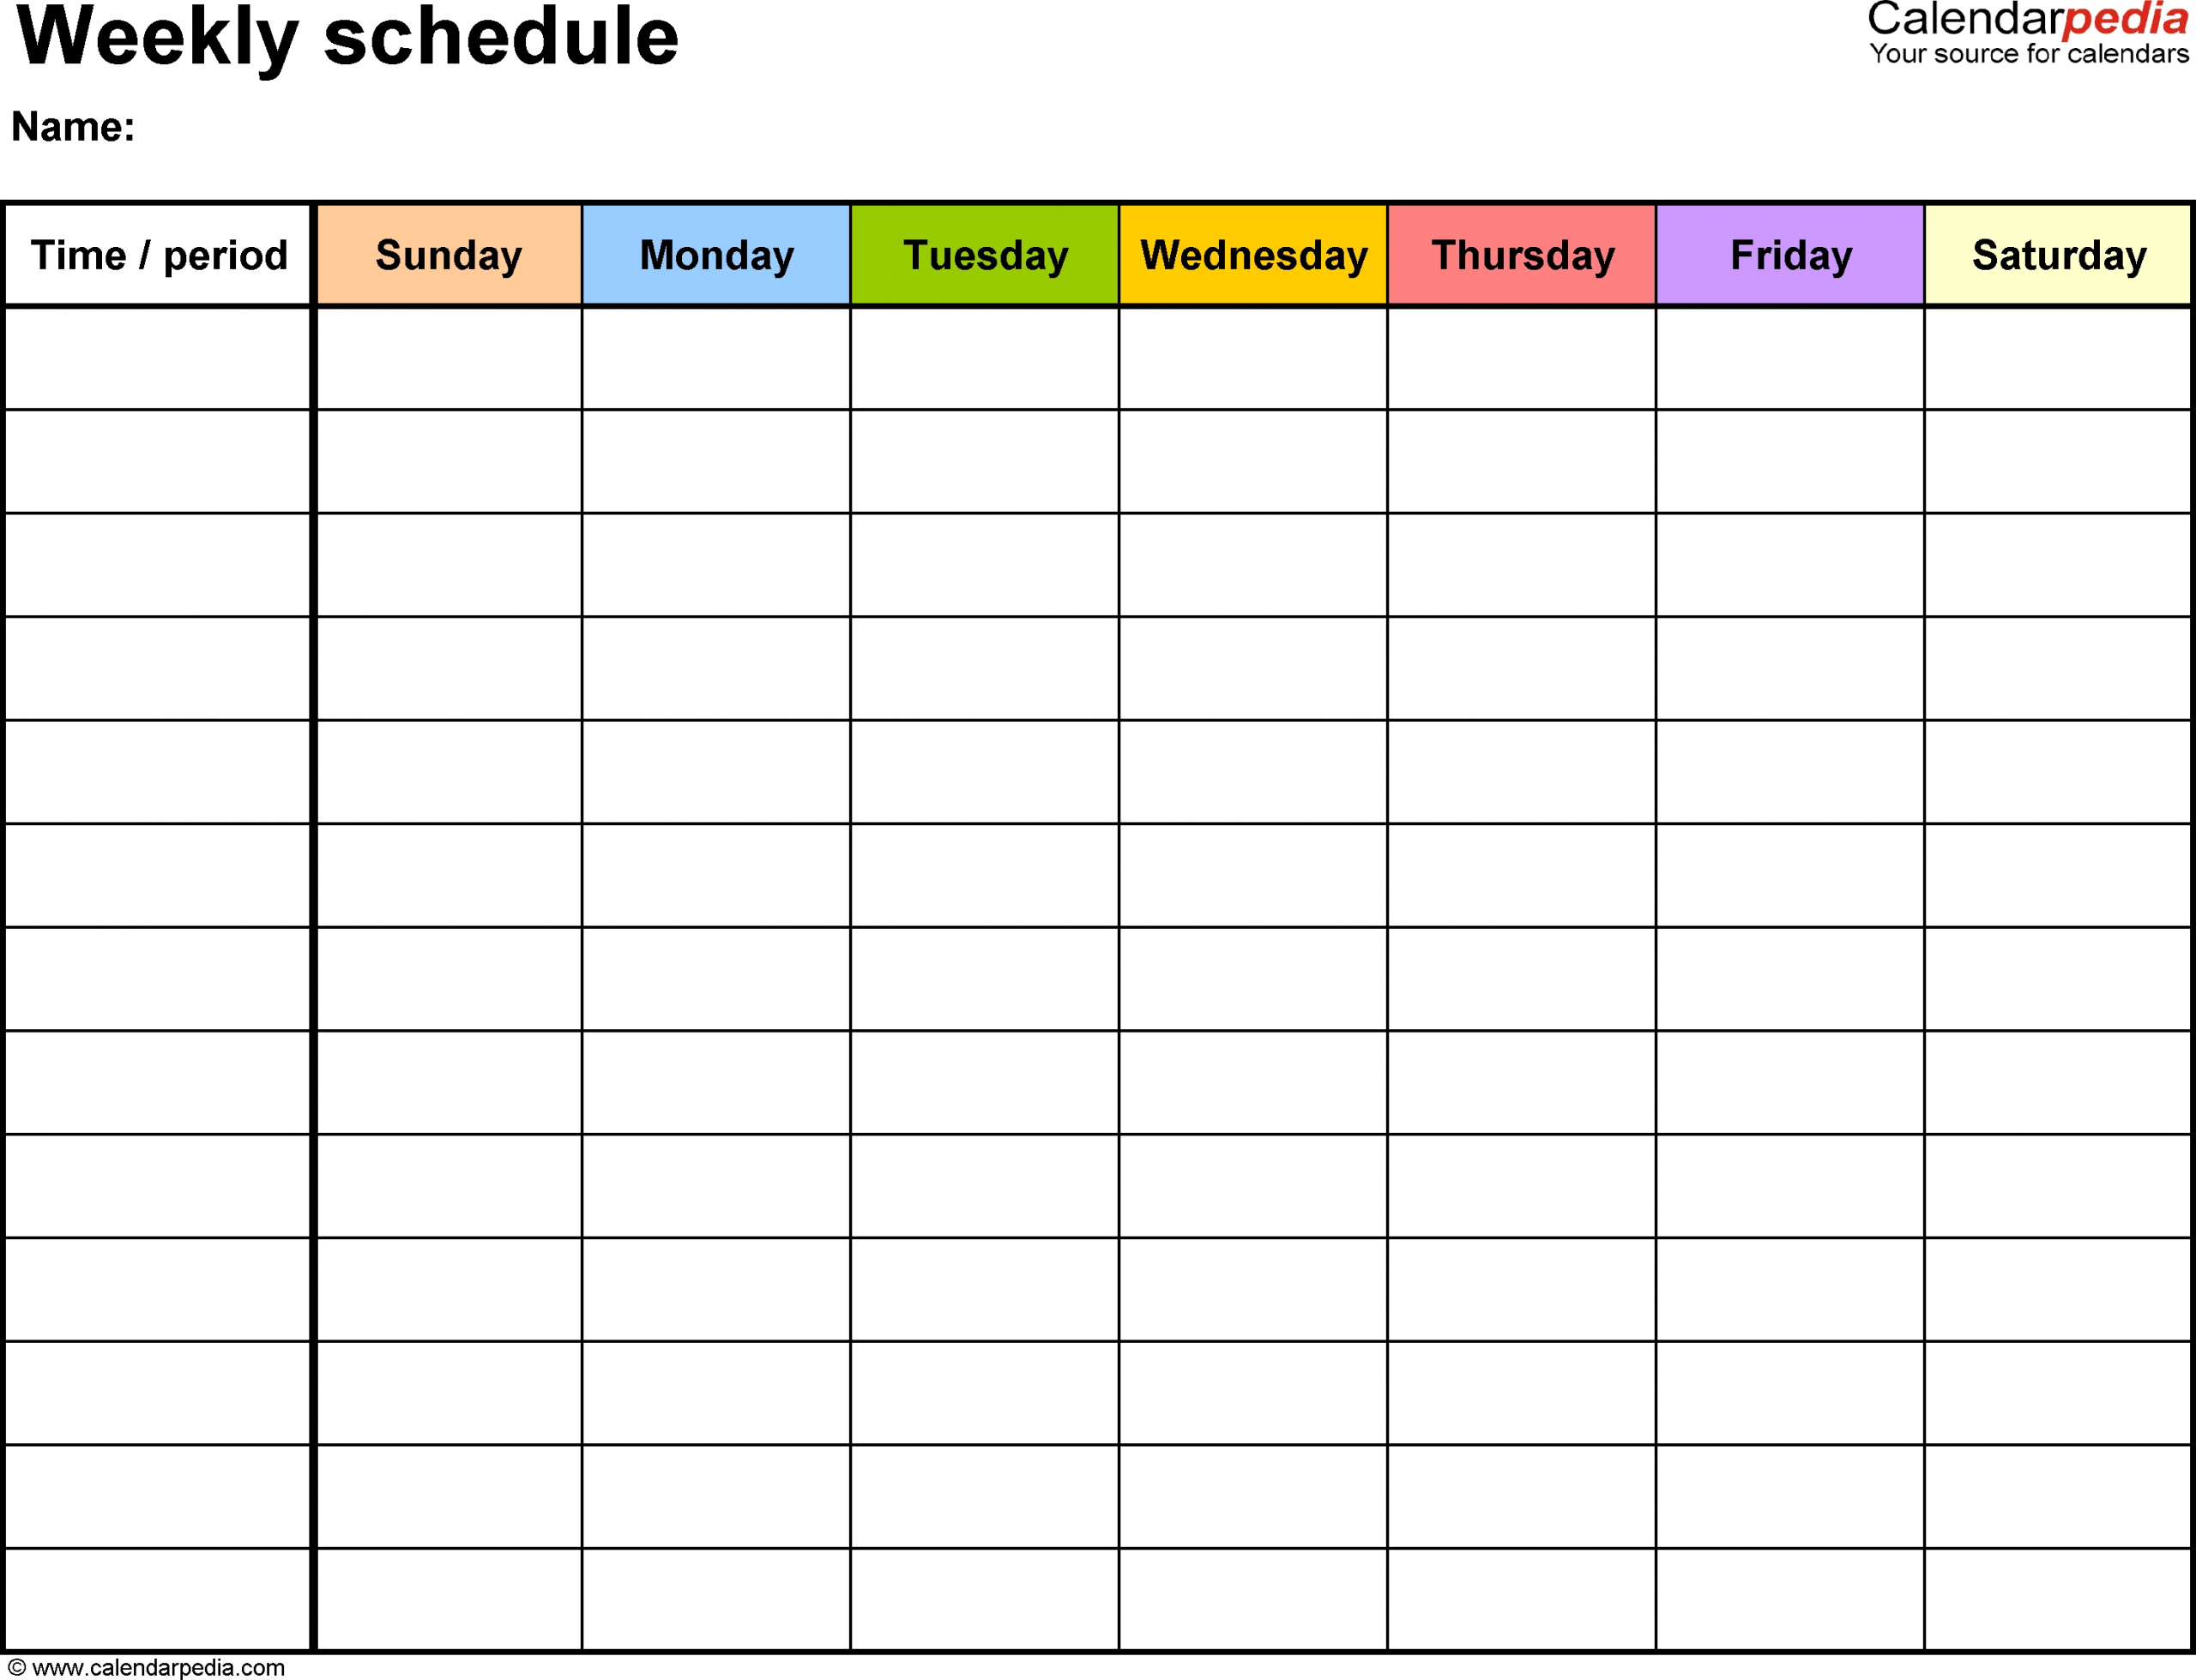 Free Weekly Schedule Templates For Excel - 18 Templates inside Free One Month Schedule Templates